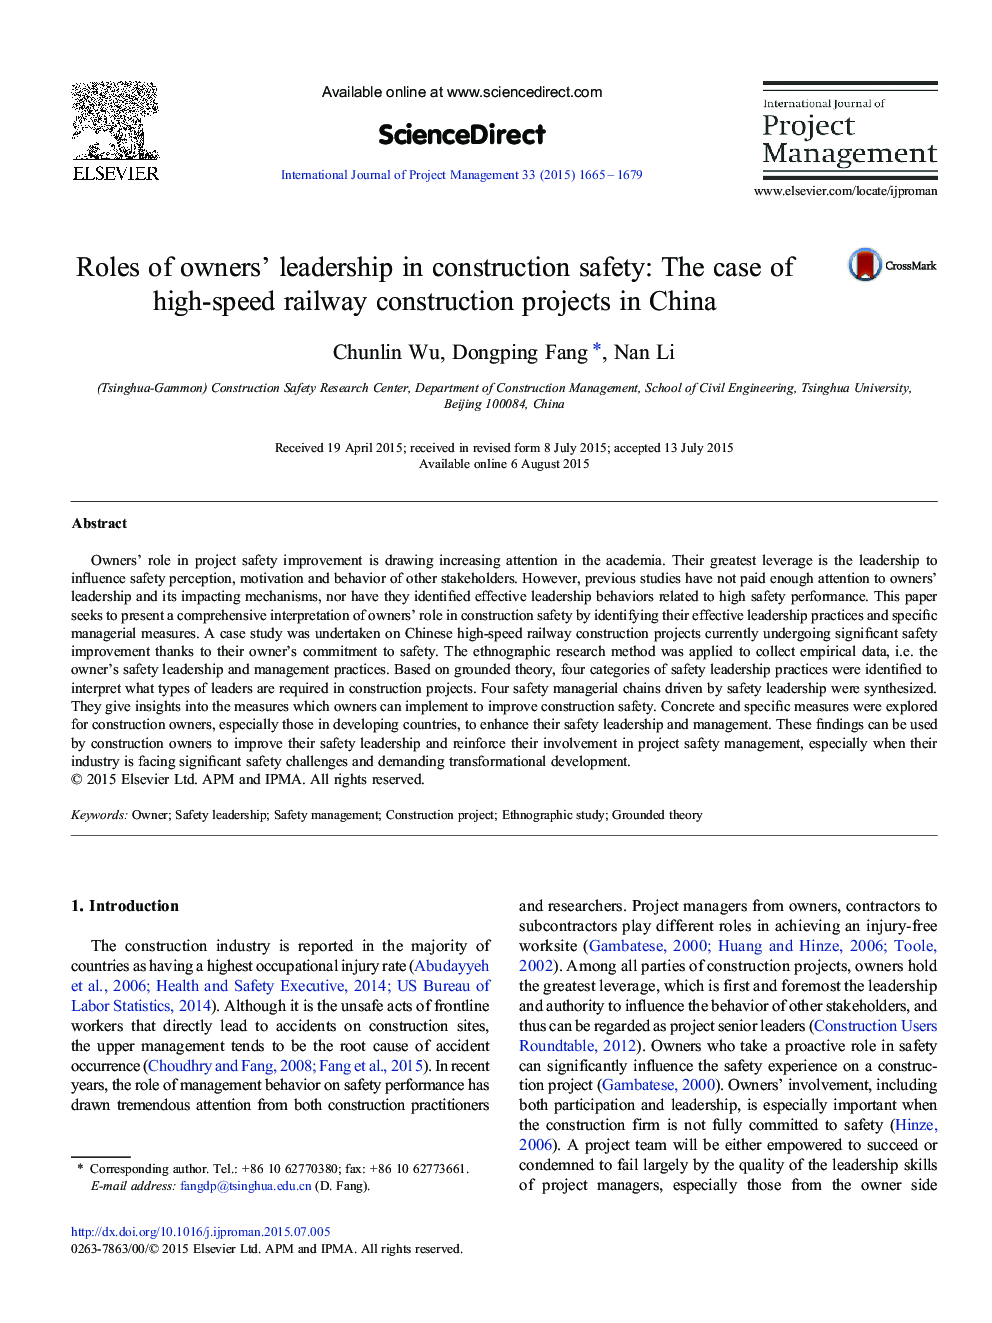 Roles of owners' leadership in construction safety: The case of high-speed railway construction projects in China